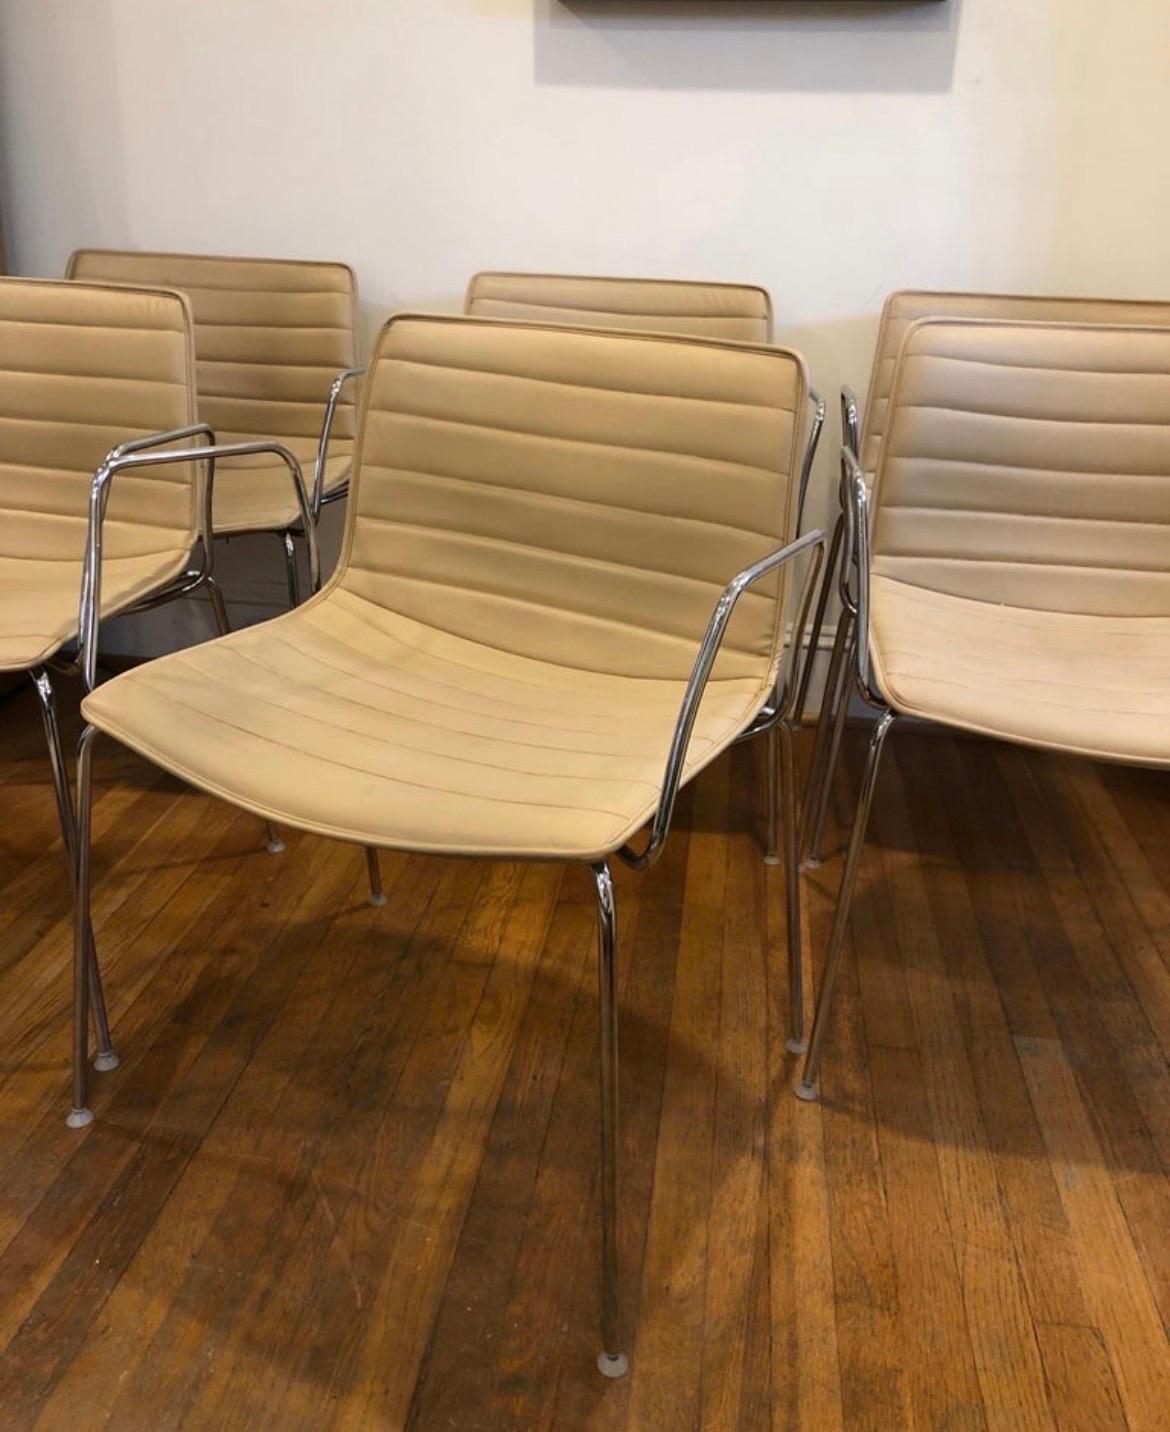 Italian Arper Catifa 53 Chairs - Tan Leather with Steel Base and Arms - 10 Available For Sale